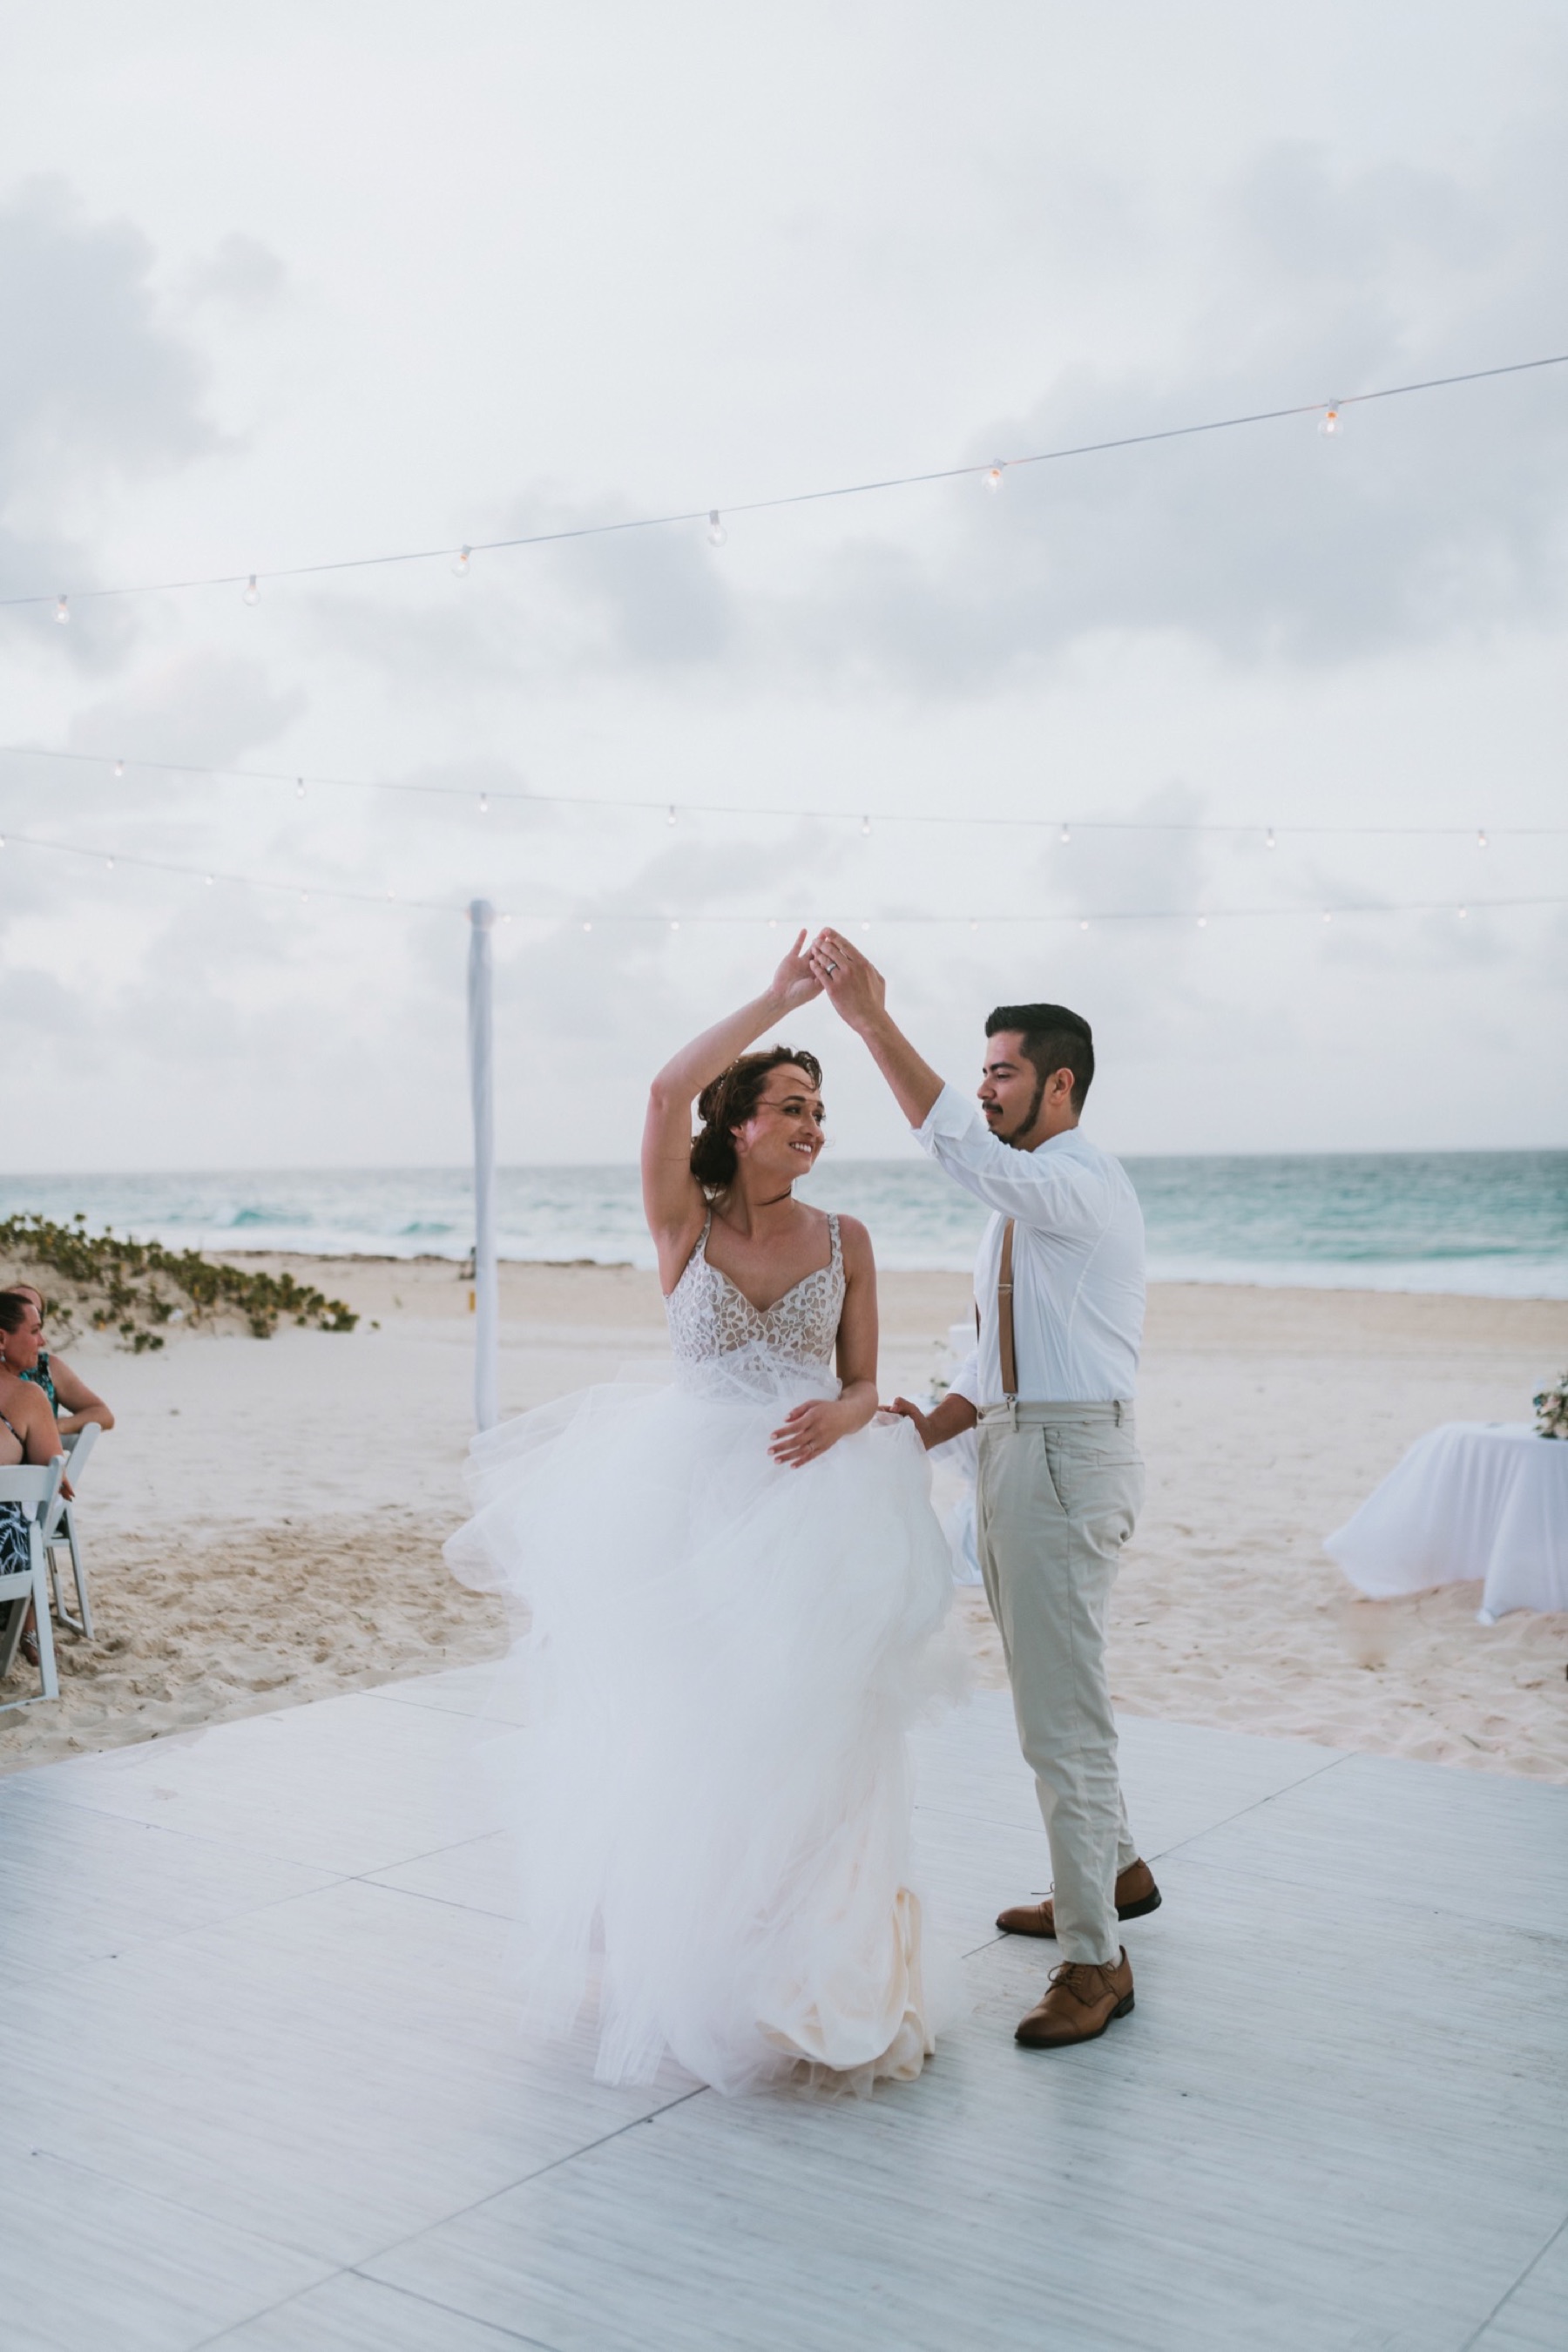 Bride and groom twirling during first dance at hard rock punta cana